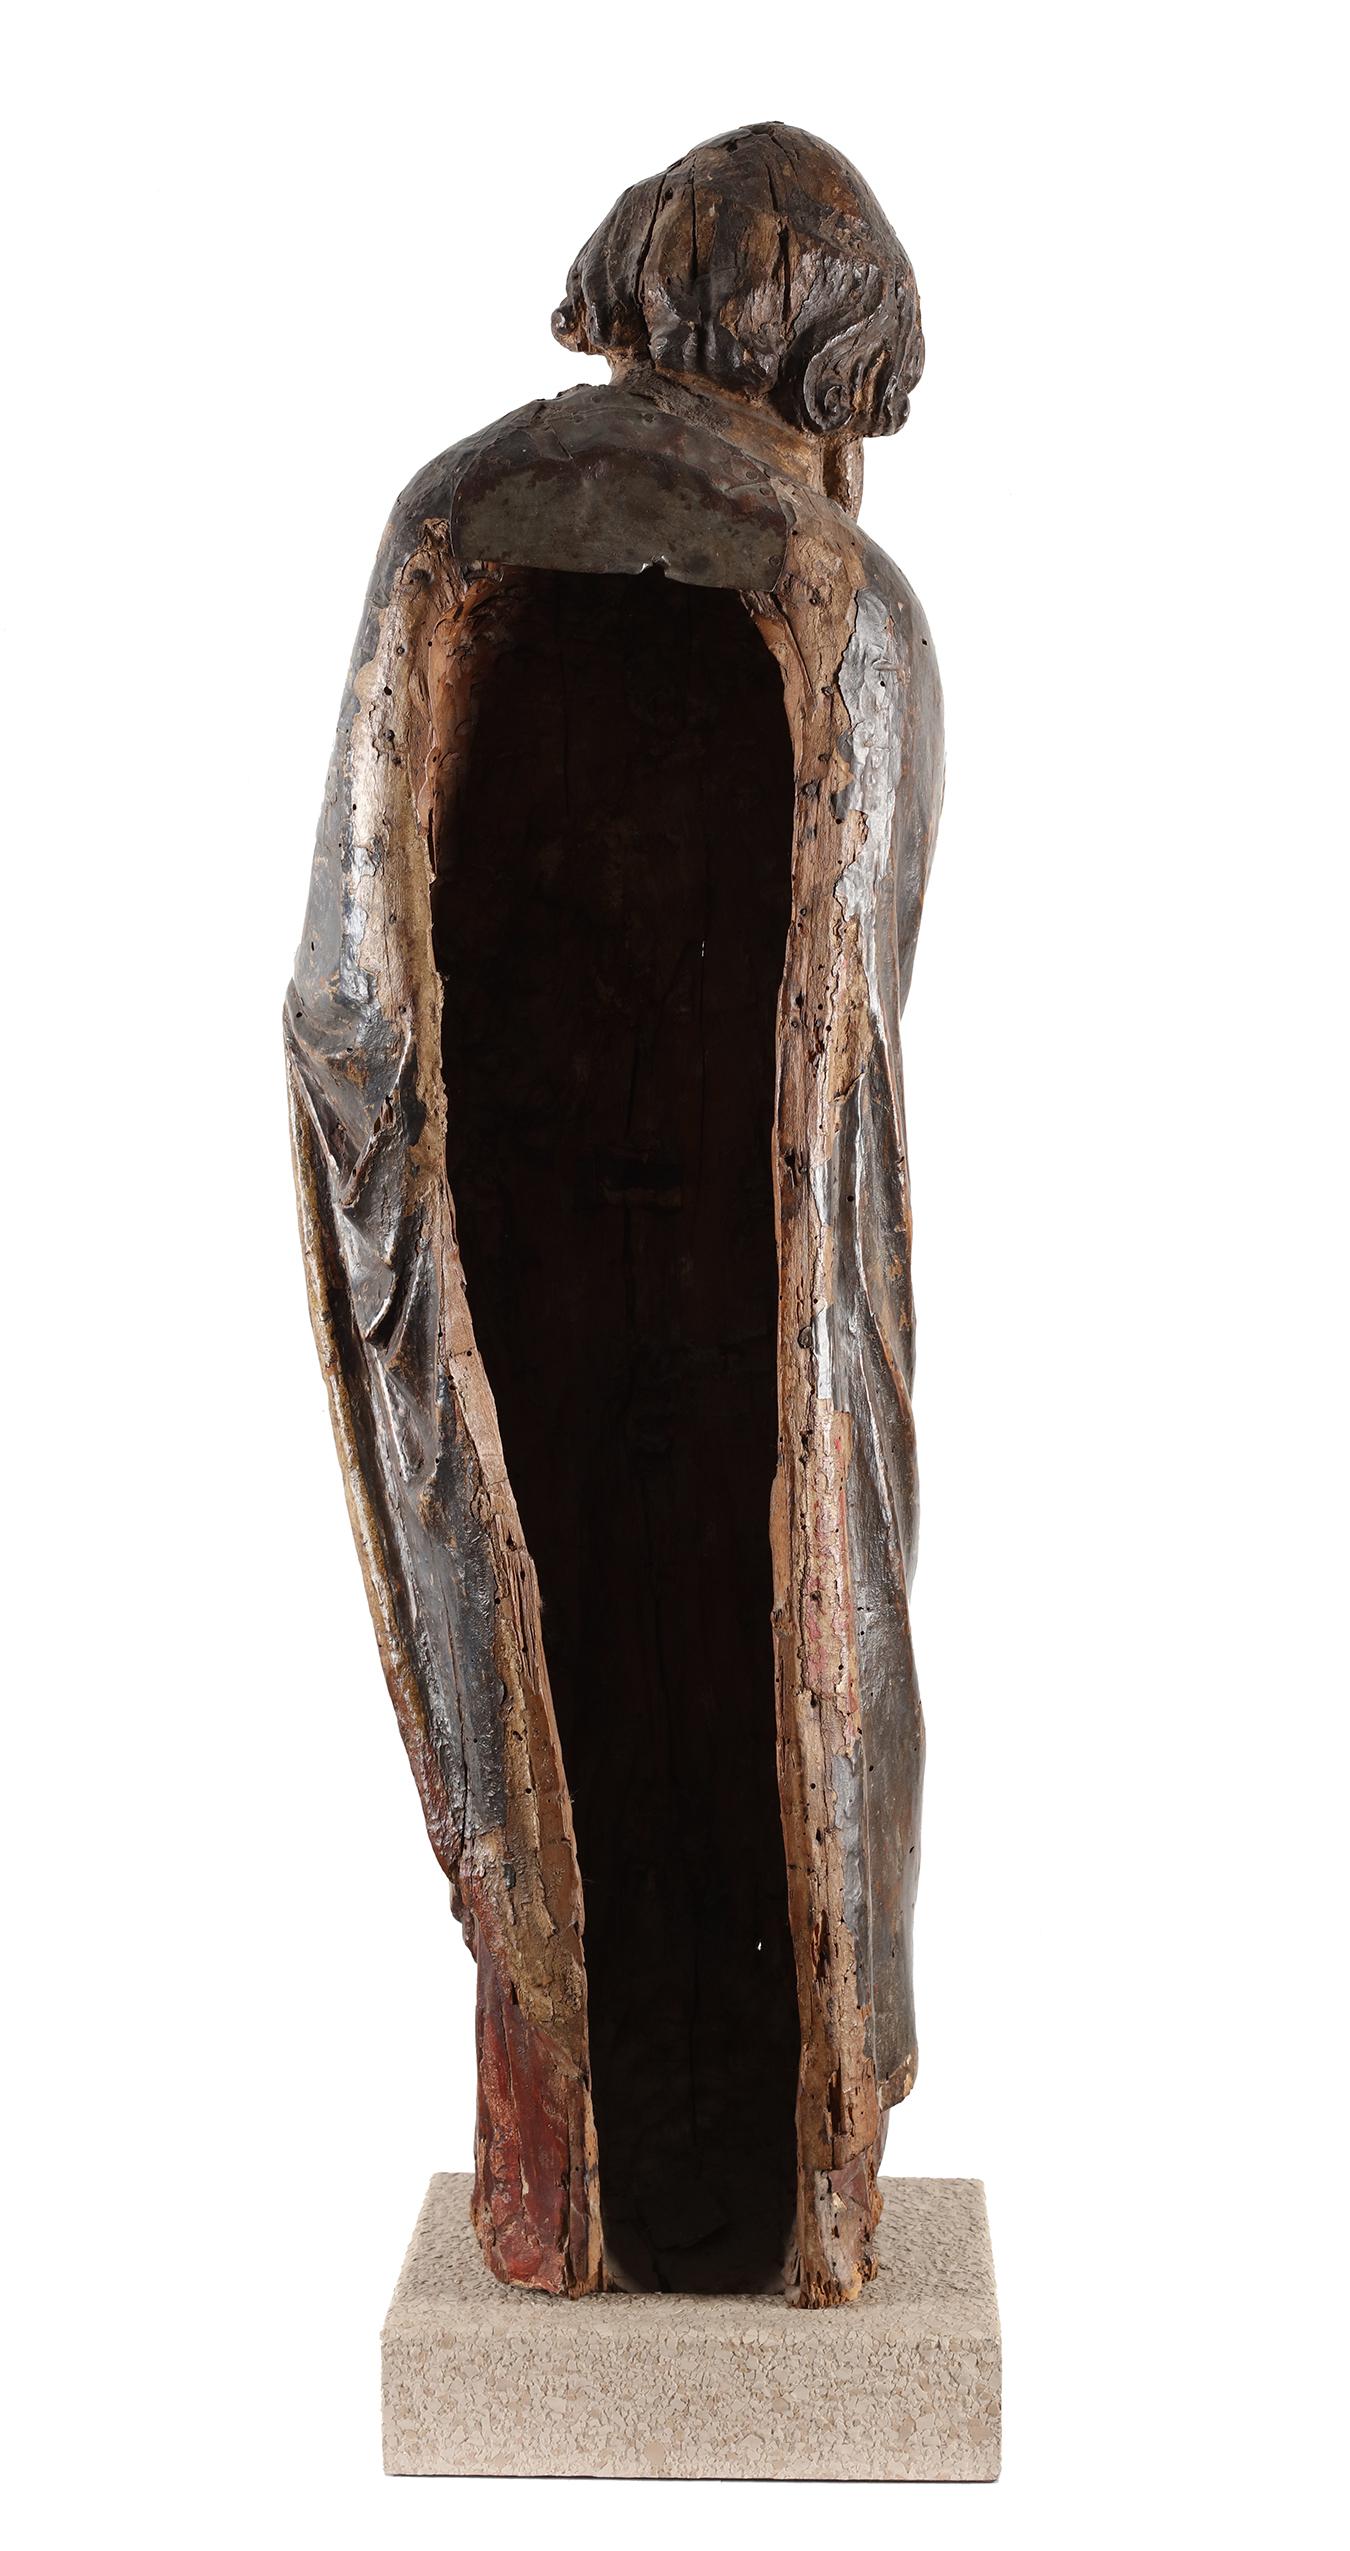 Sculpted in wood, original polychromy

 
A wooden sculpture from the 15th century, portraying St. John the Evangelist. The sculpture captures St. John with a sense of serene majesty. His visage is marked with a combination of devotion and wisdom.